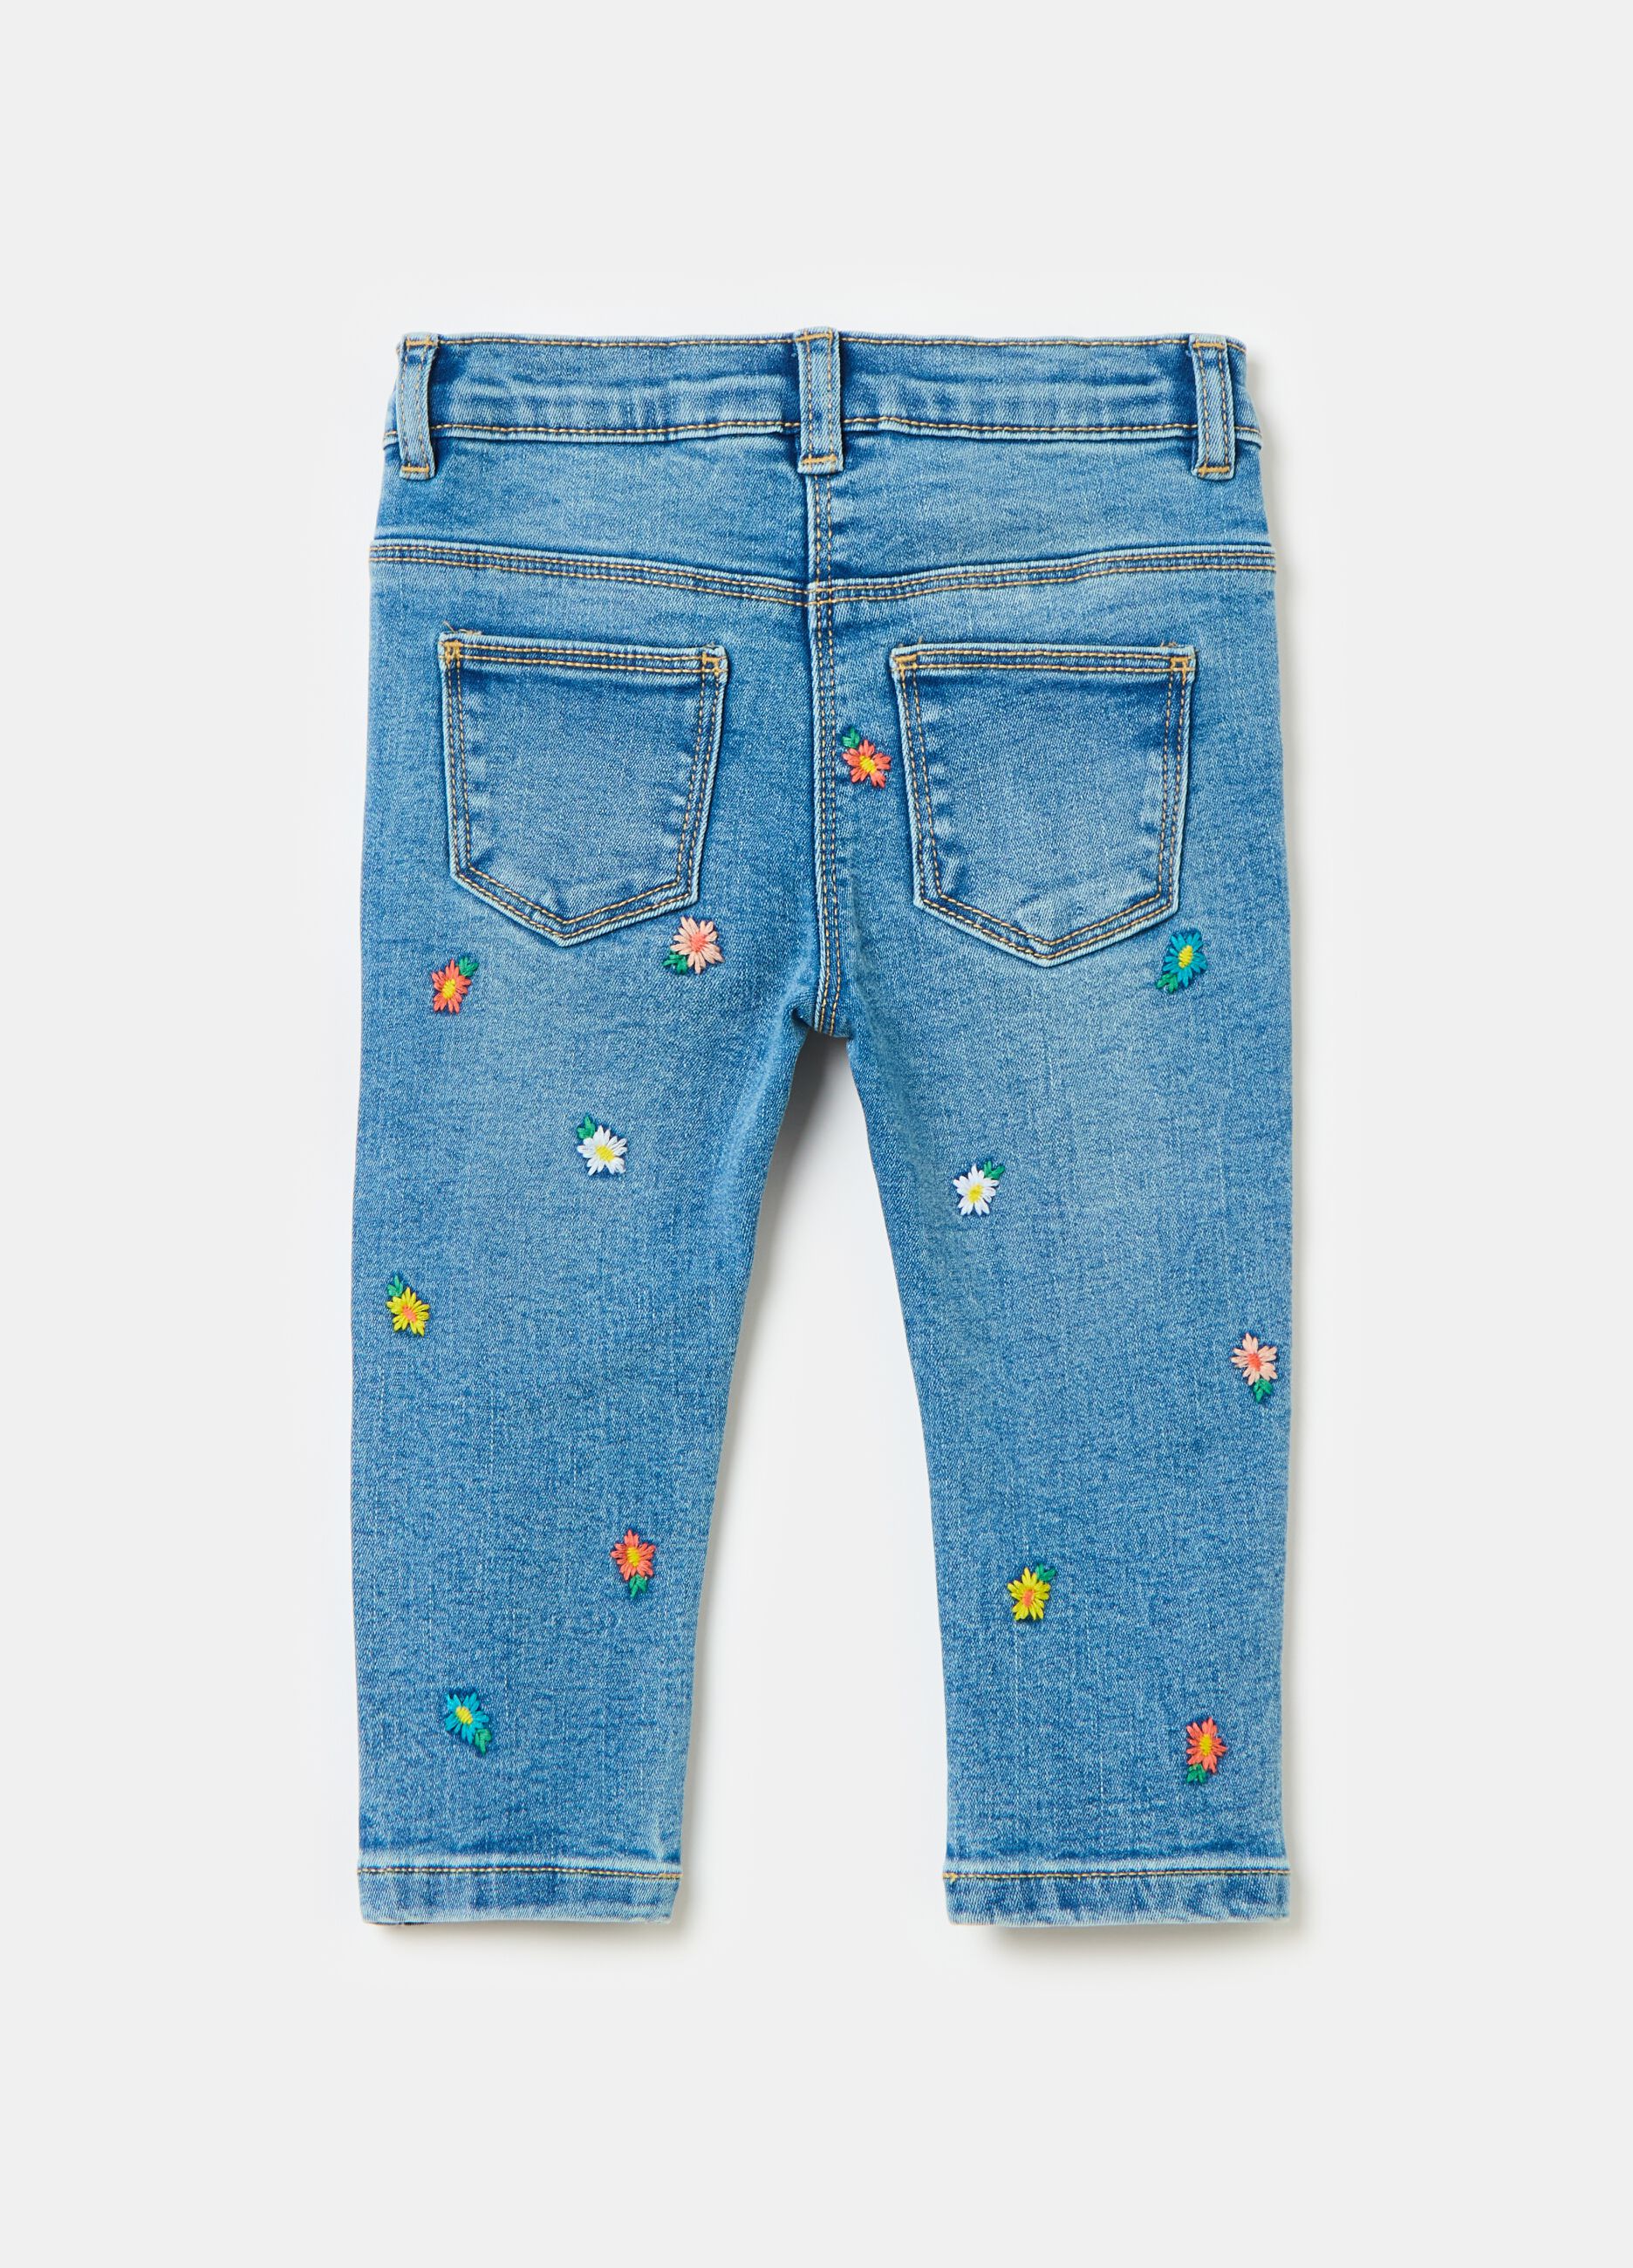 Jeans with small flowers embroidery